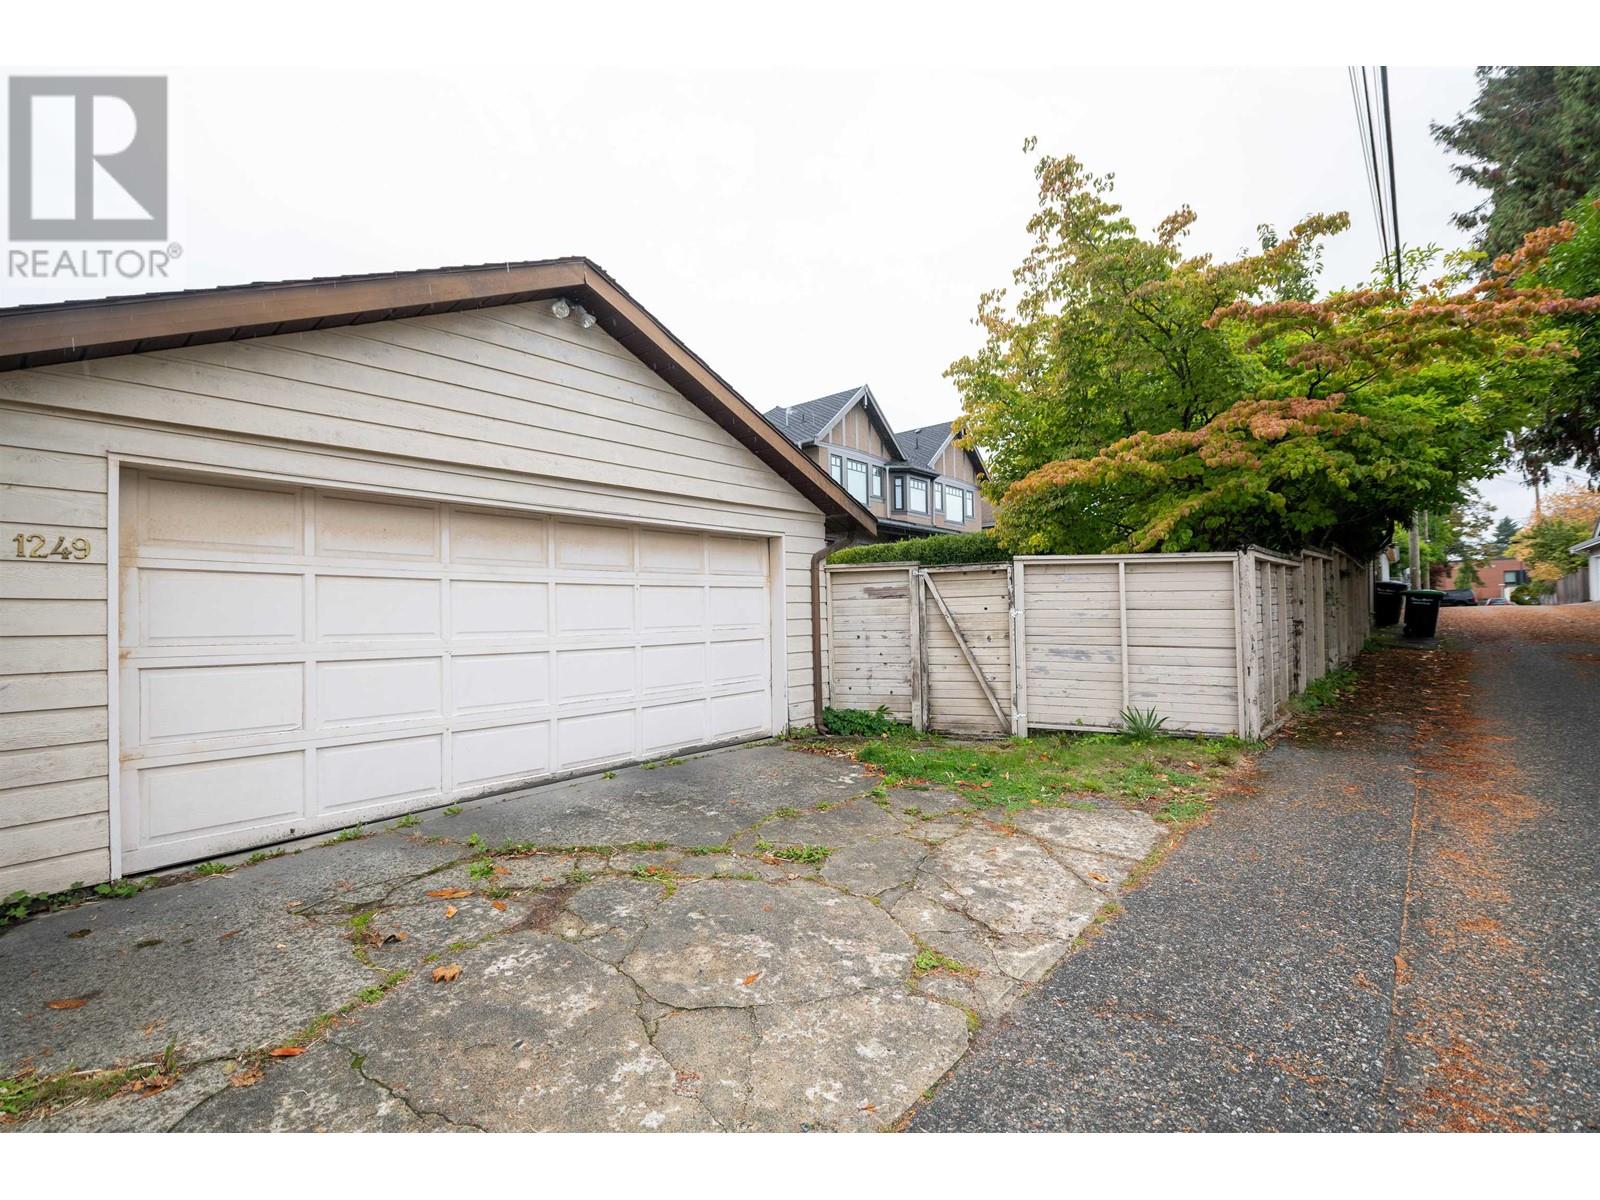 Listing Picture 28 of 29 : 1249 W 39TH AVENUE, Vancouver / 溫哥華 - 魯藝地產 Yvonne Lu Group - MLS Medallion Club Member